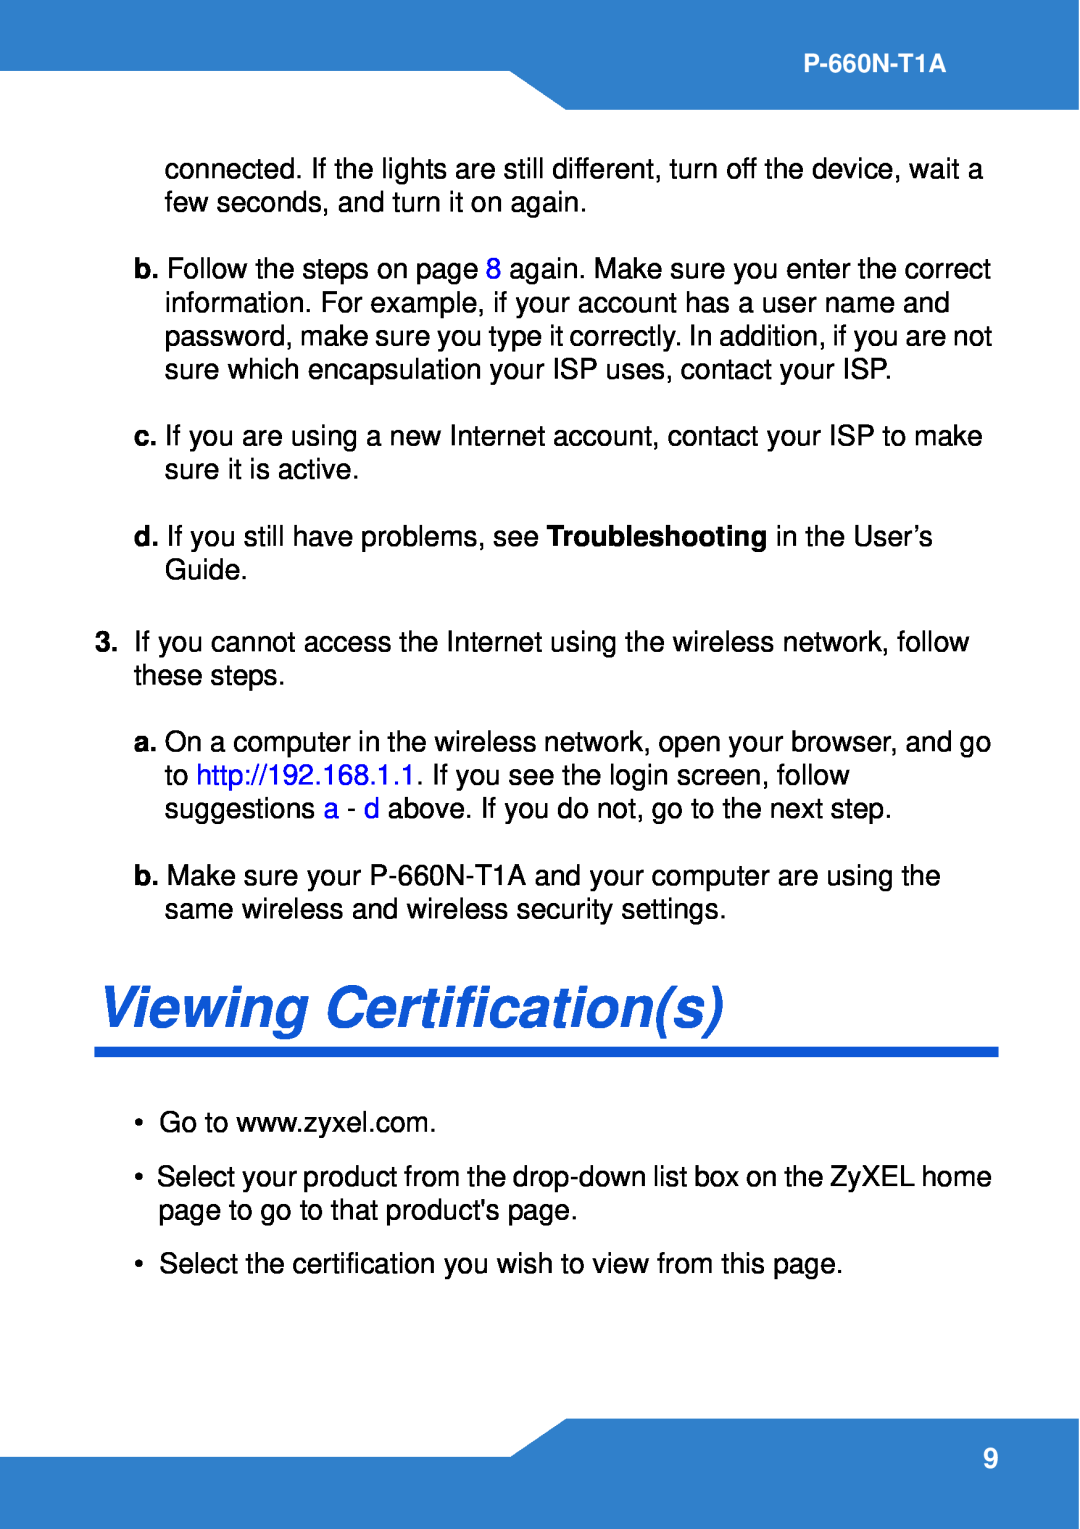 ZyXEL Communications P-660N-T1A manual Viewing Certifications 